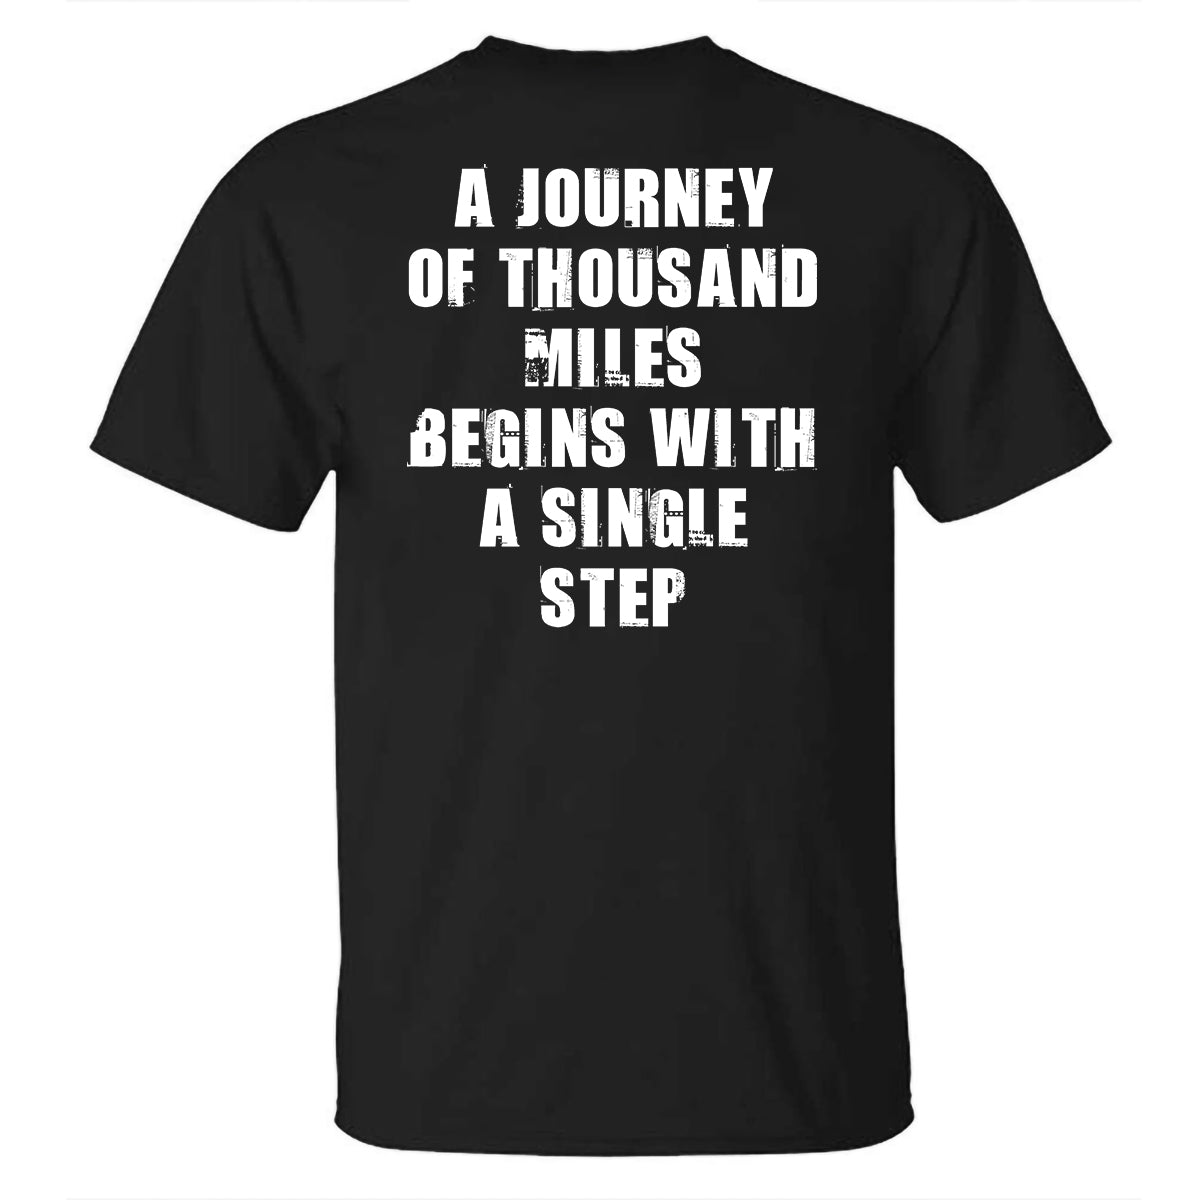 GrootWear A Journey Of Thousand Miles Begins With A Single Step Printed T-shirt